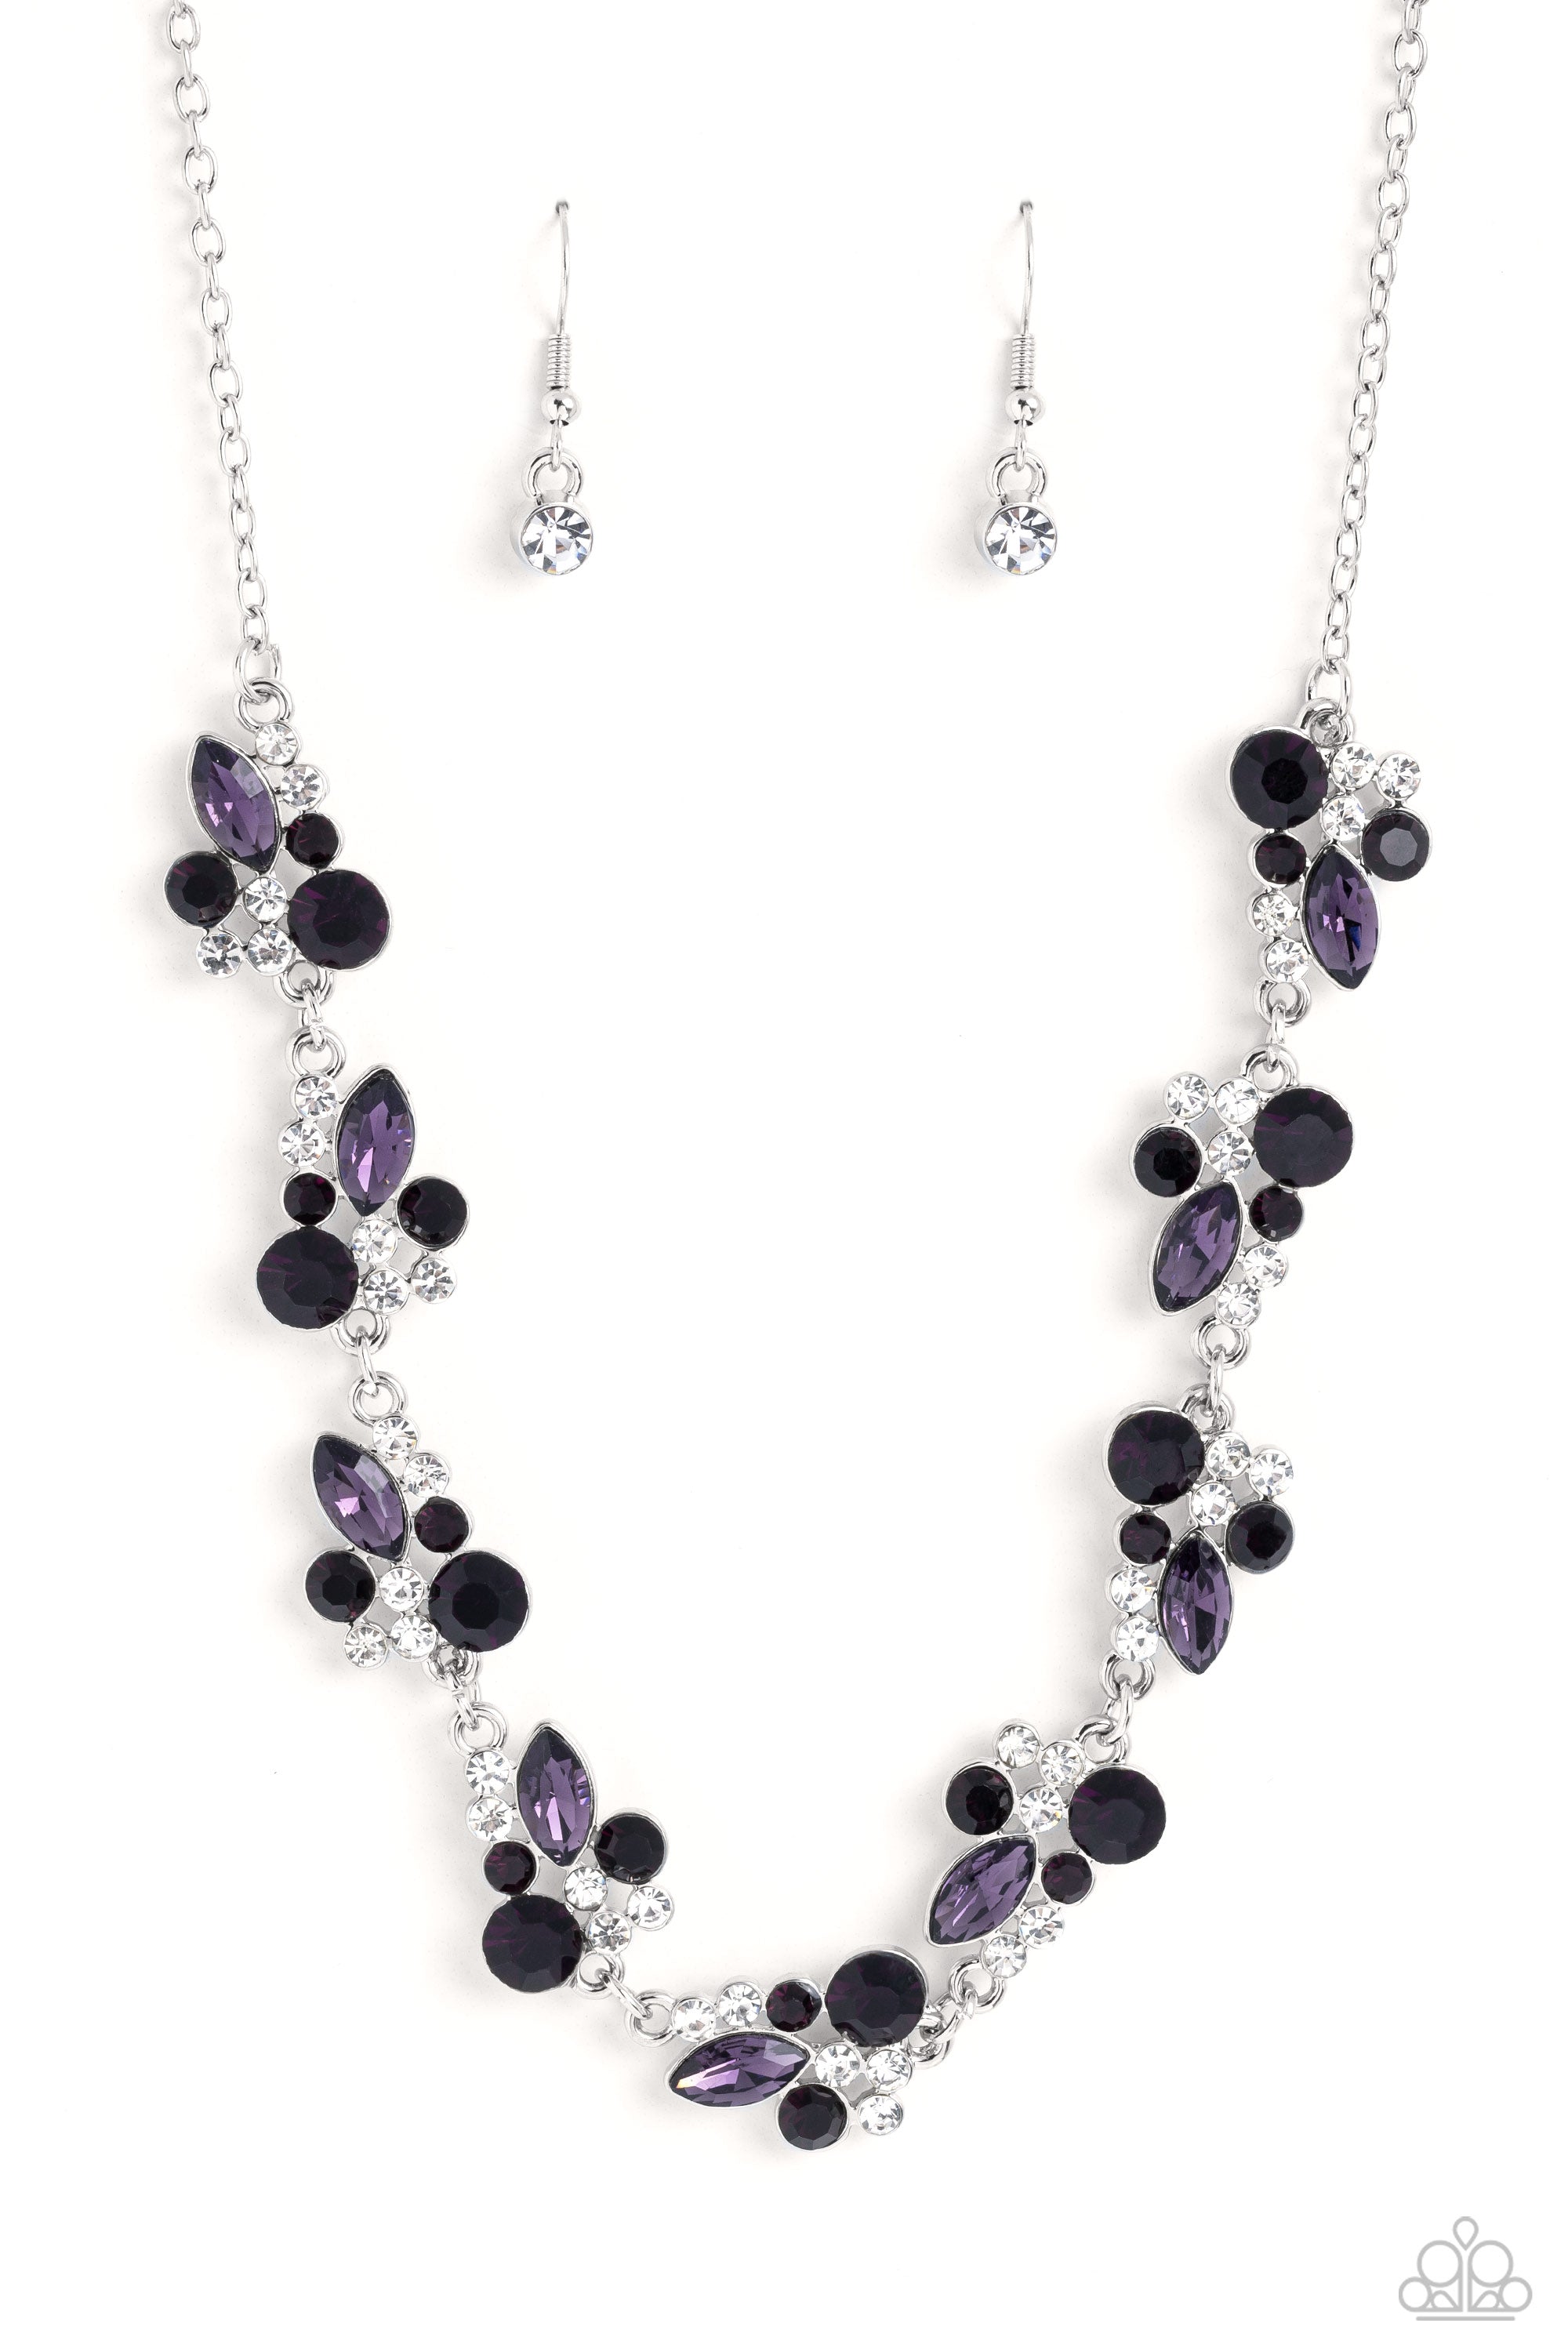 Swimming in Sparkles Purple Rhinestone Necklace - Paparazzi Accessories- lightbox - CarasShop.com - $5 Jewelry by Cara Jewels